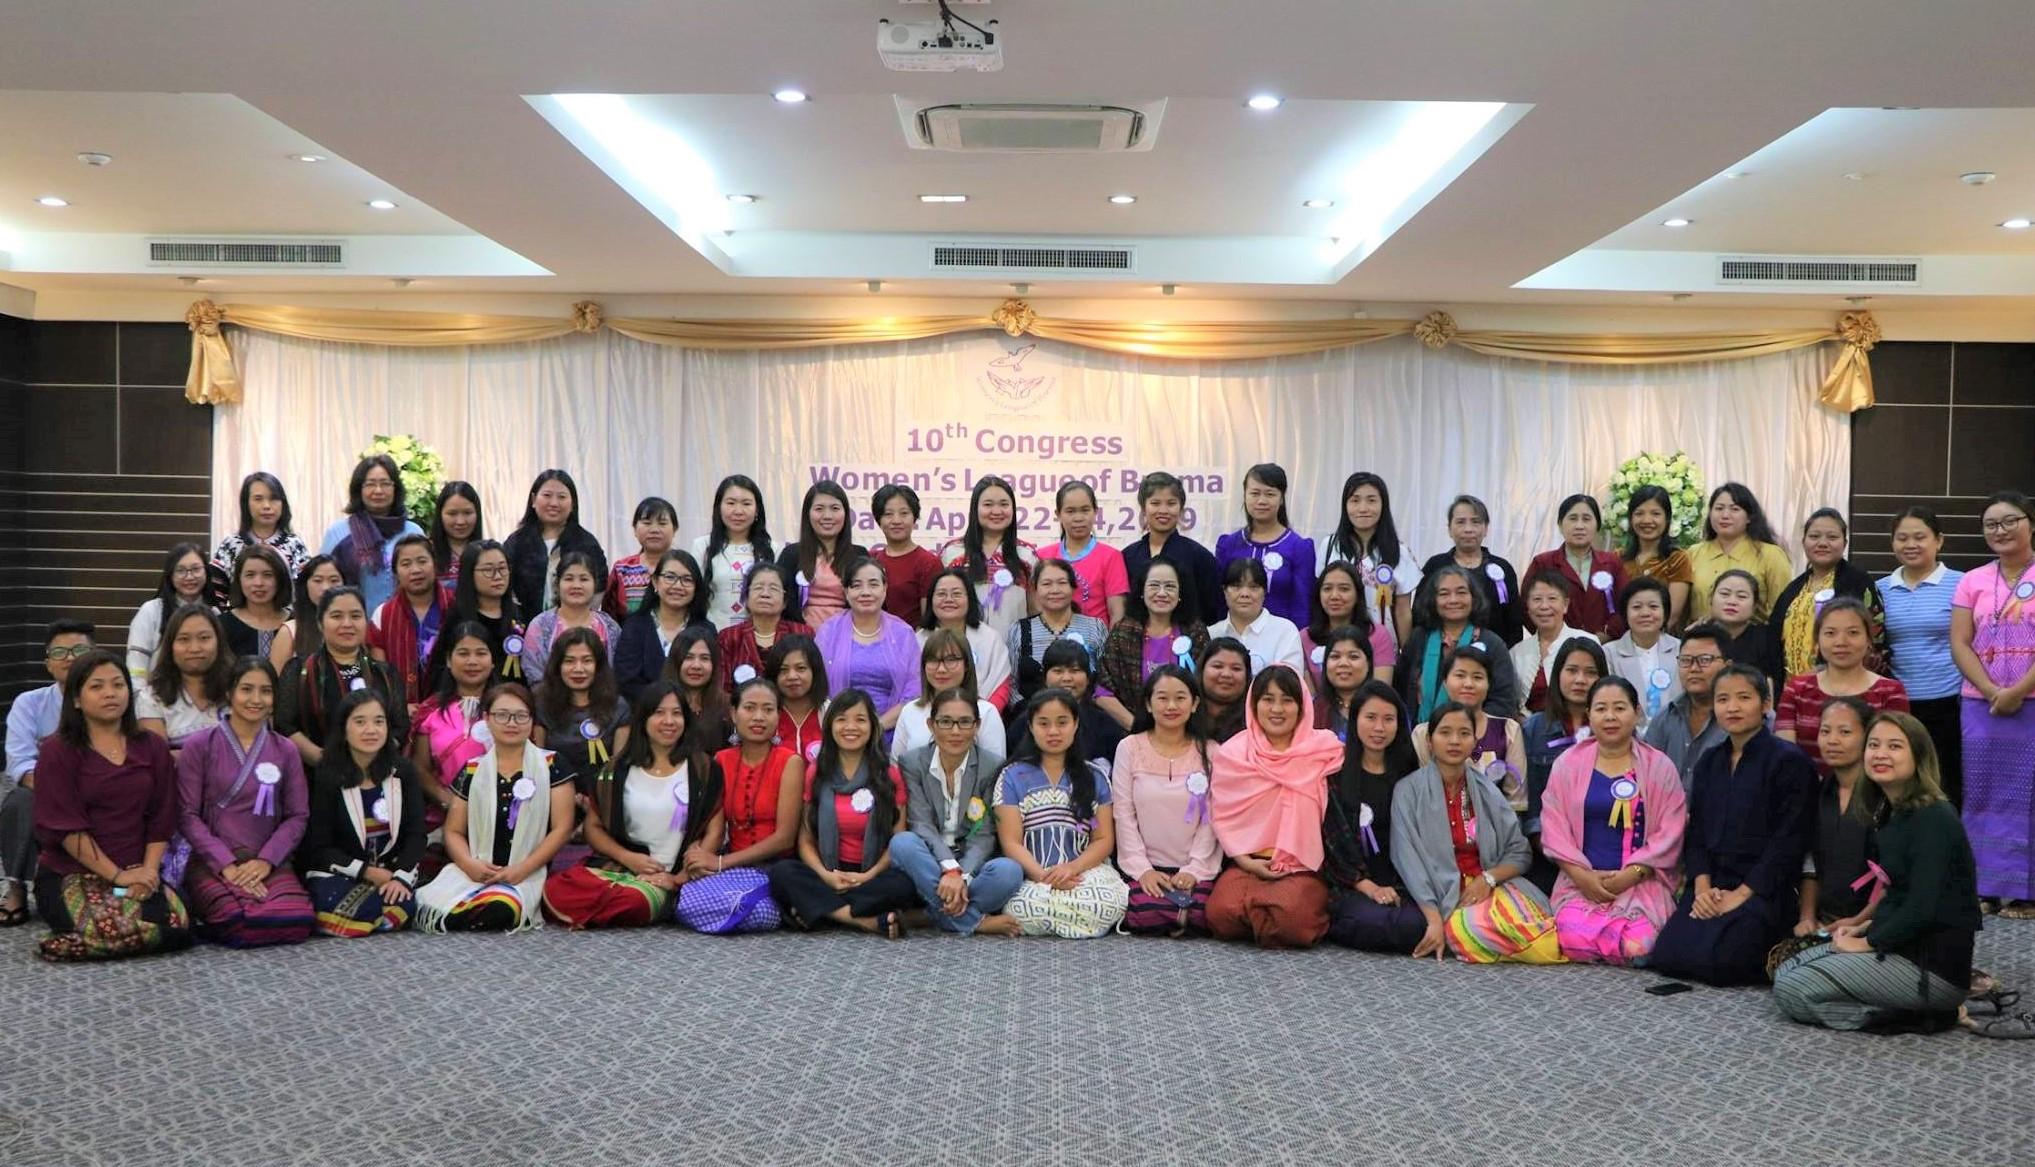 10th Congress of Women's League of Burma were conducted on 2019 April 22-24